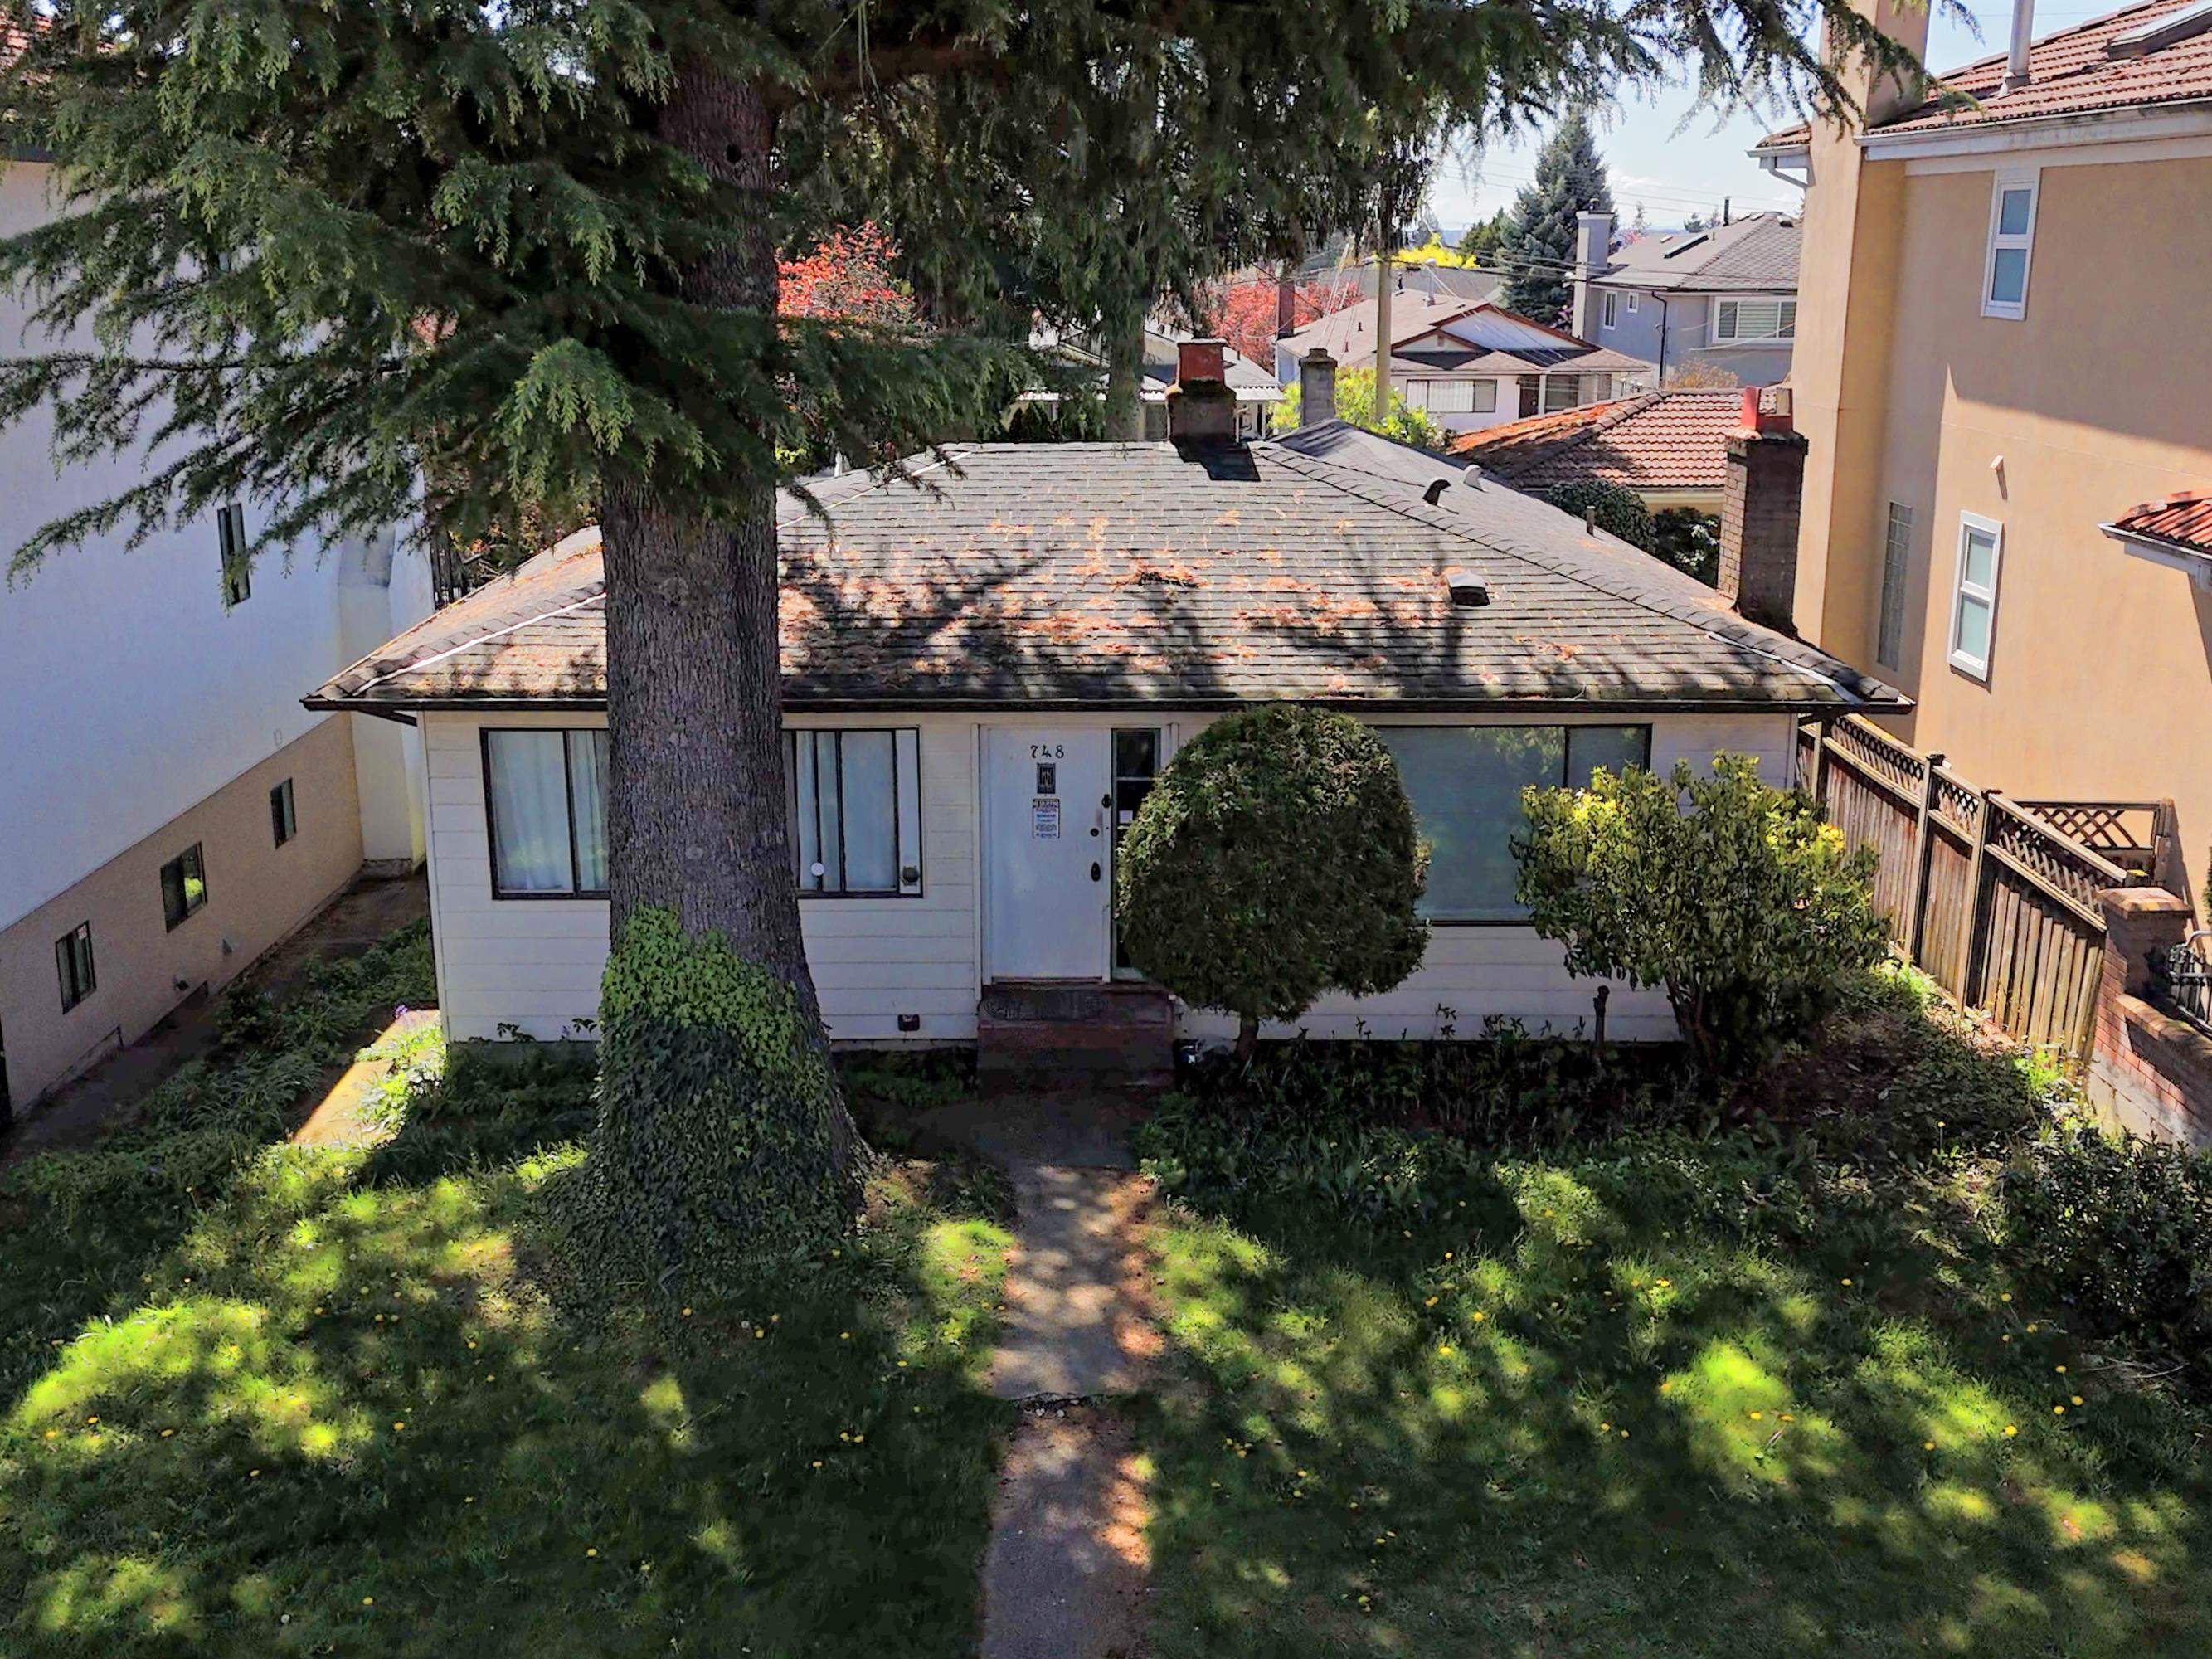 Listing image of 748 W 61ST AVENUE